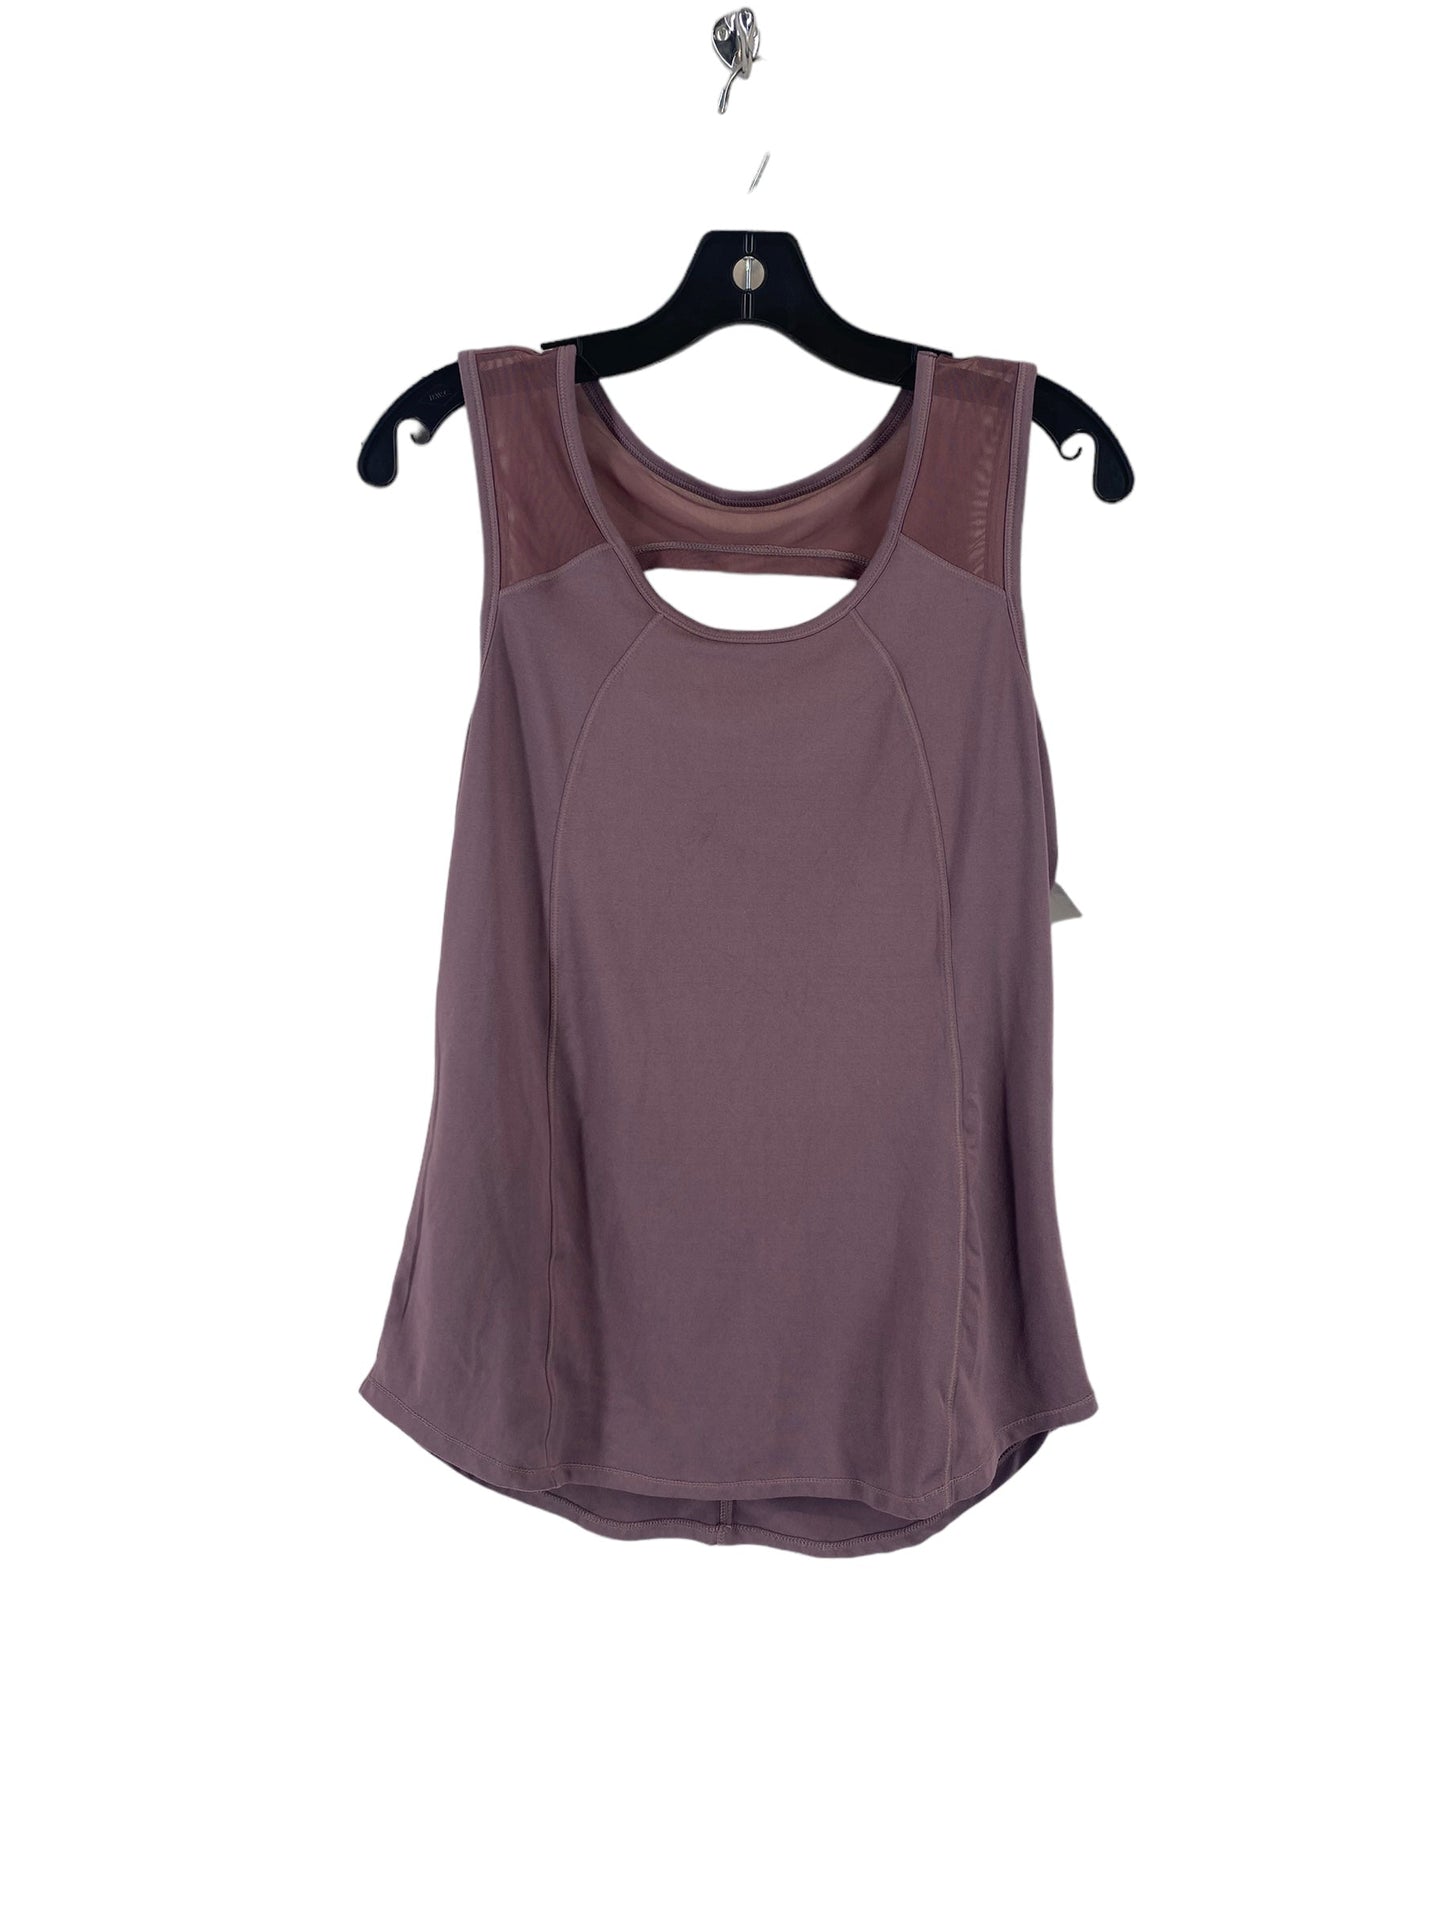 Athletic Tank Top By Gaiam  Size: S